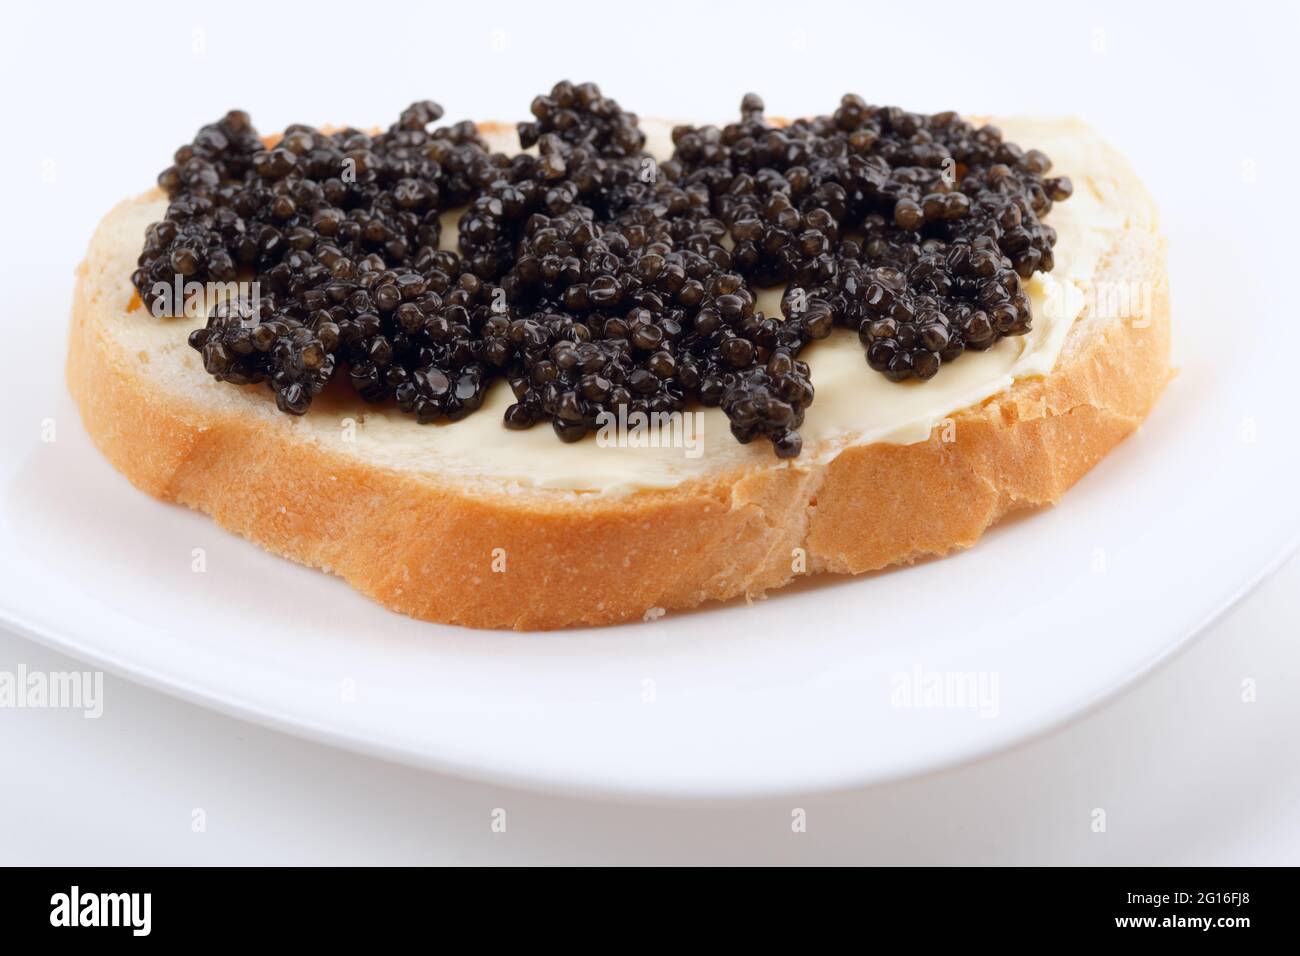 Real, not imitated, beluga caviar on bread with butter, close-up Stock Photo